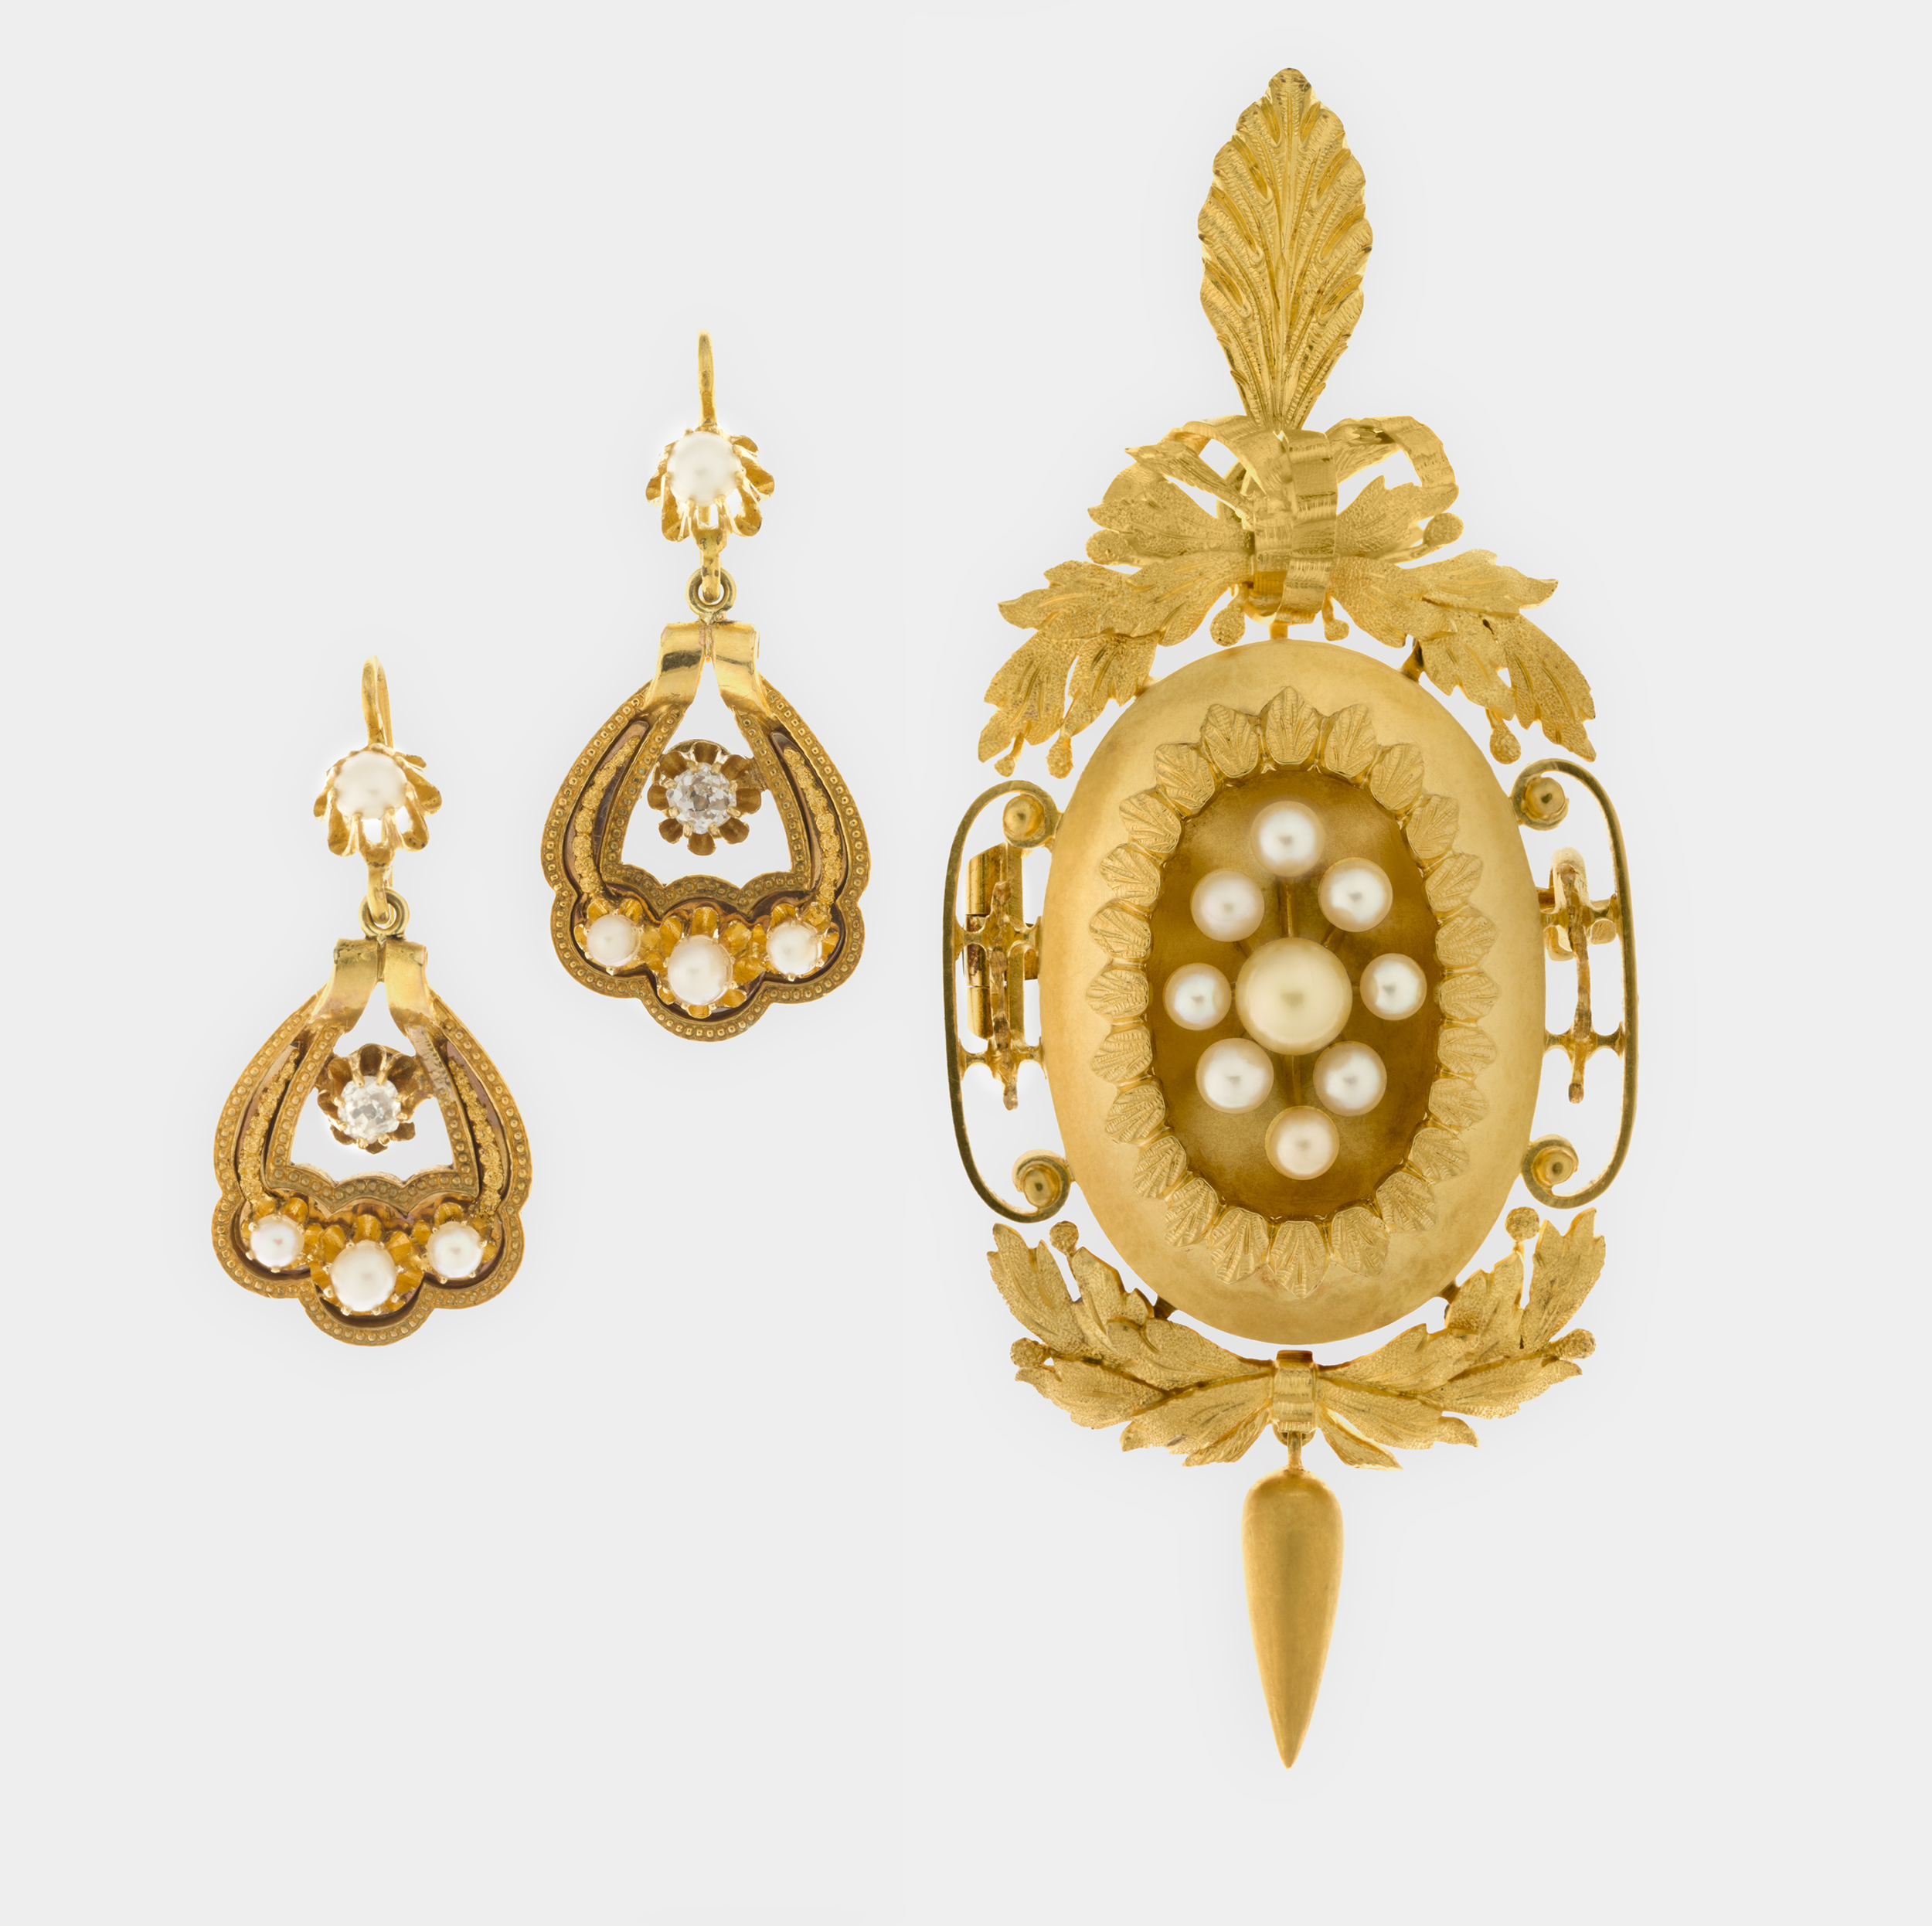   Henry Steiner,&nbsp;  Pendant/brooch and pair of ear pendants set, in fitted case &nbsp;c.1870.&nbsp;18 carat gold, seed pearls, diamonds.&nbsp;National Gallery of Australia, Canberra.&nbsp;Purchased 2012 